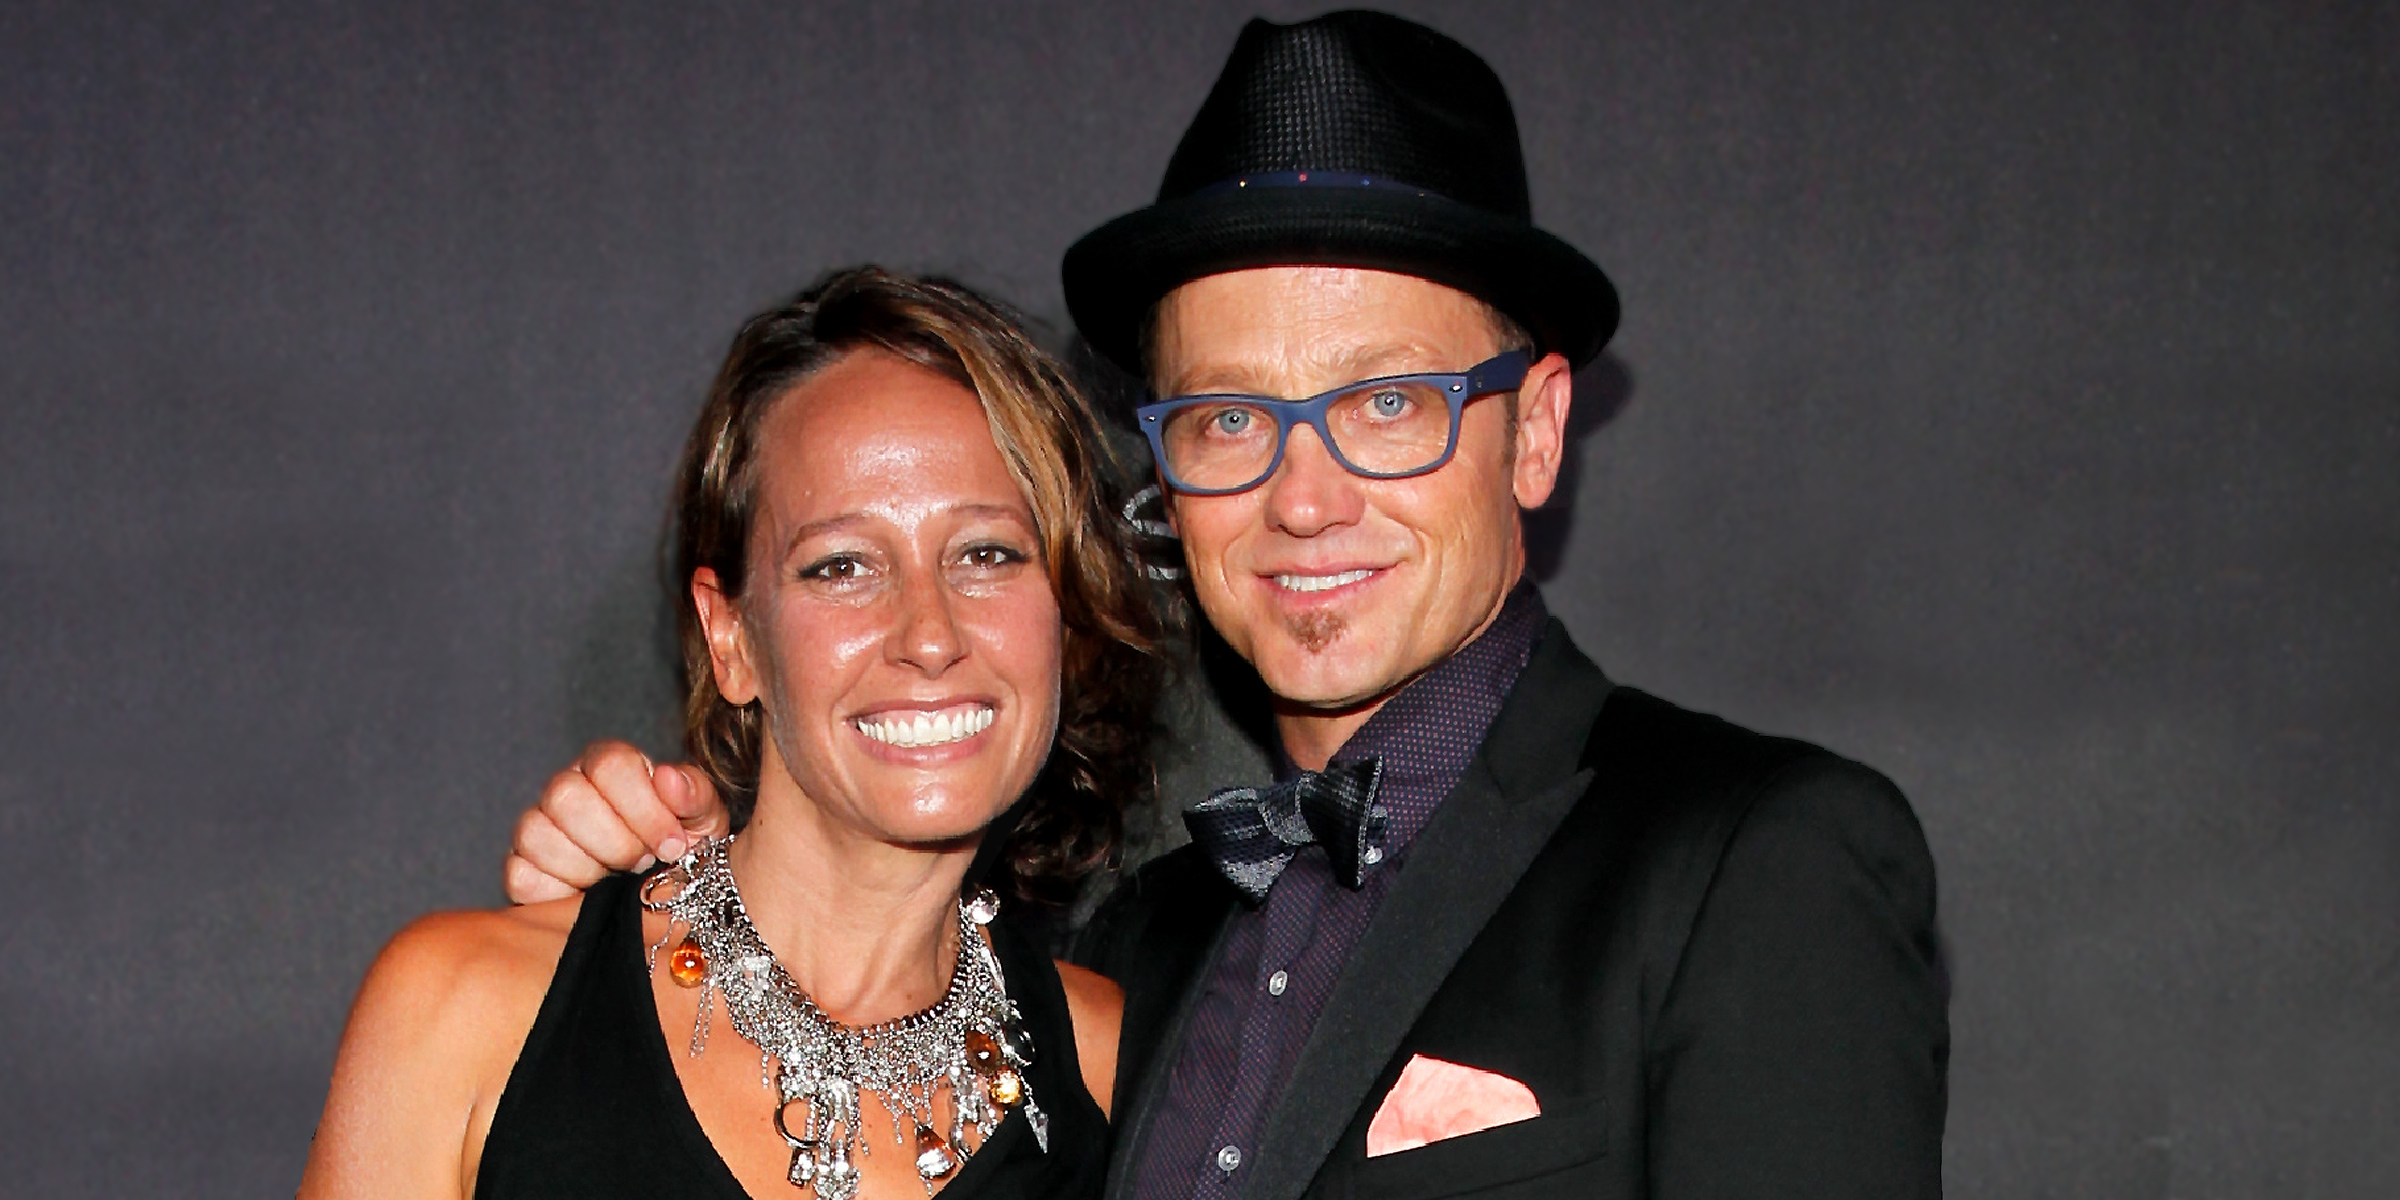 Amanda Levy McKeehan and TobyMac | Source: Getty Images